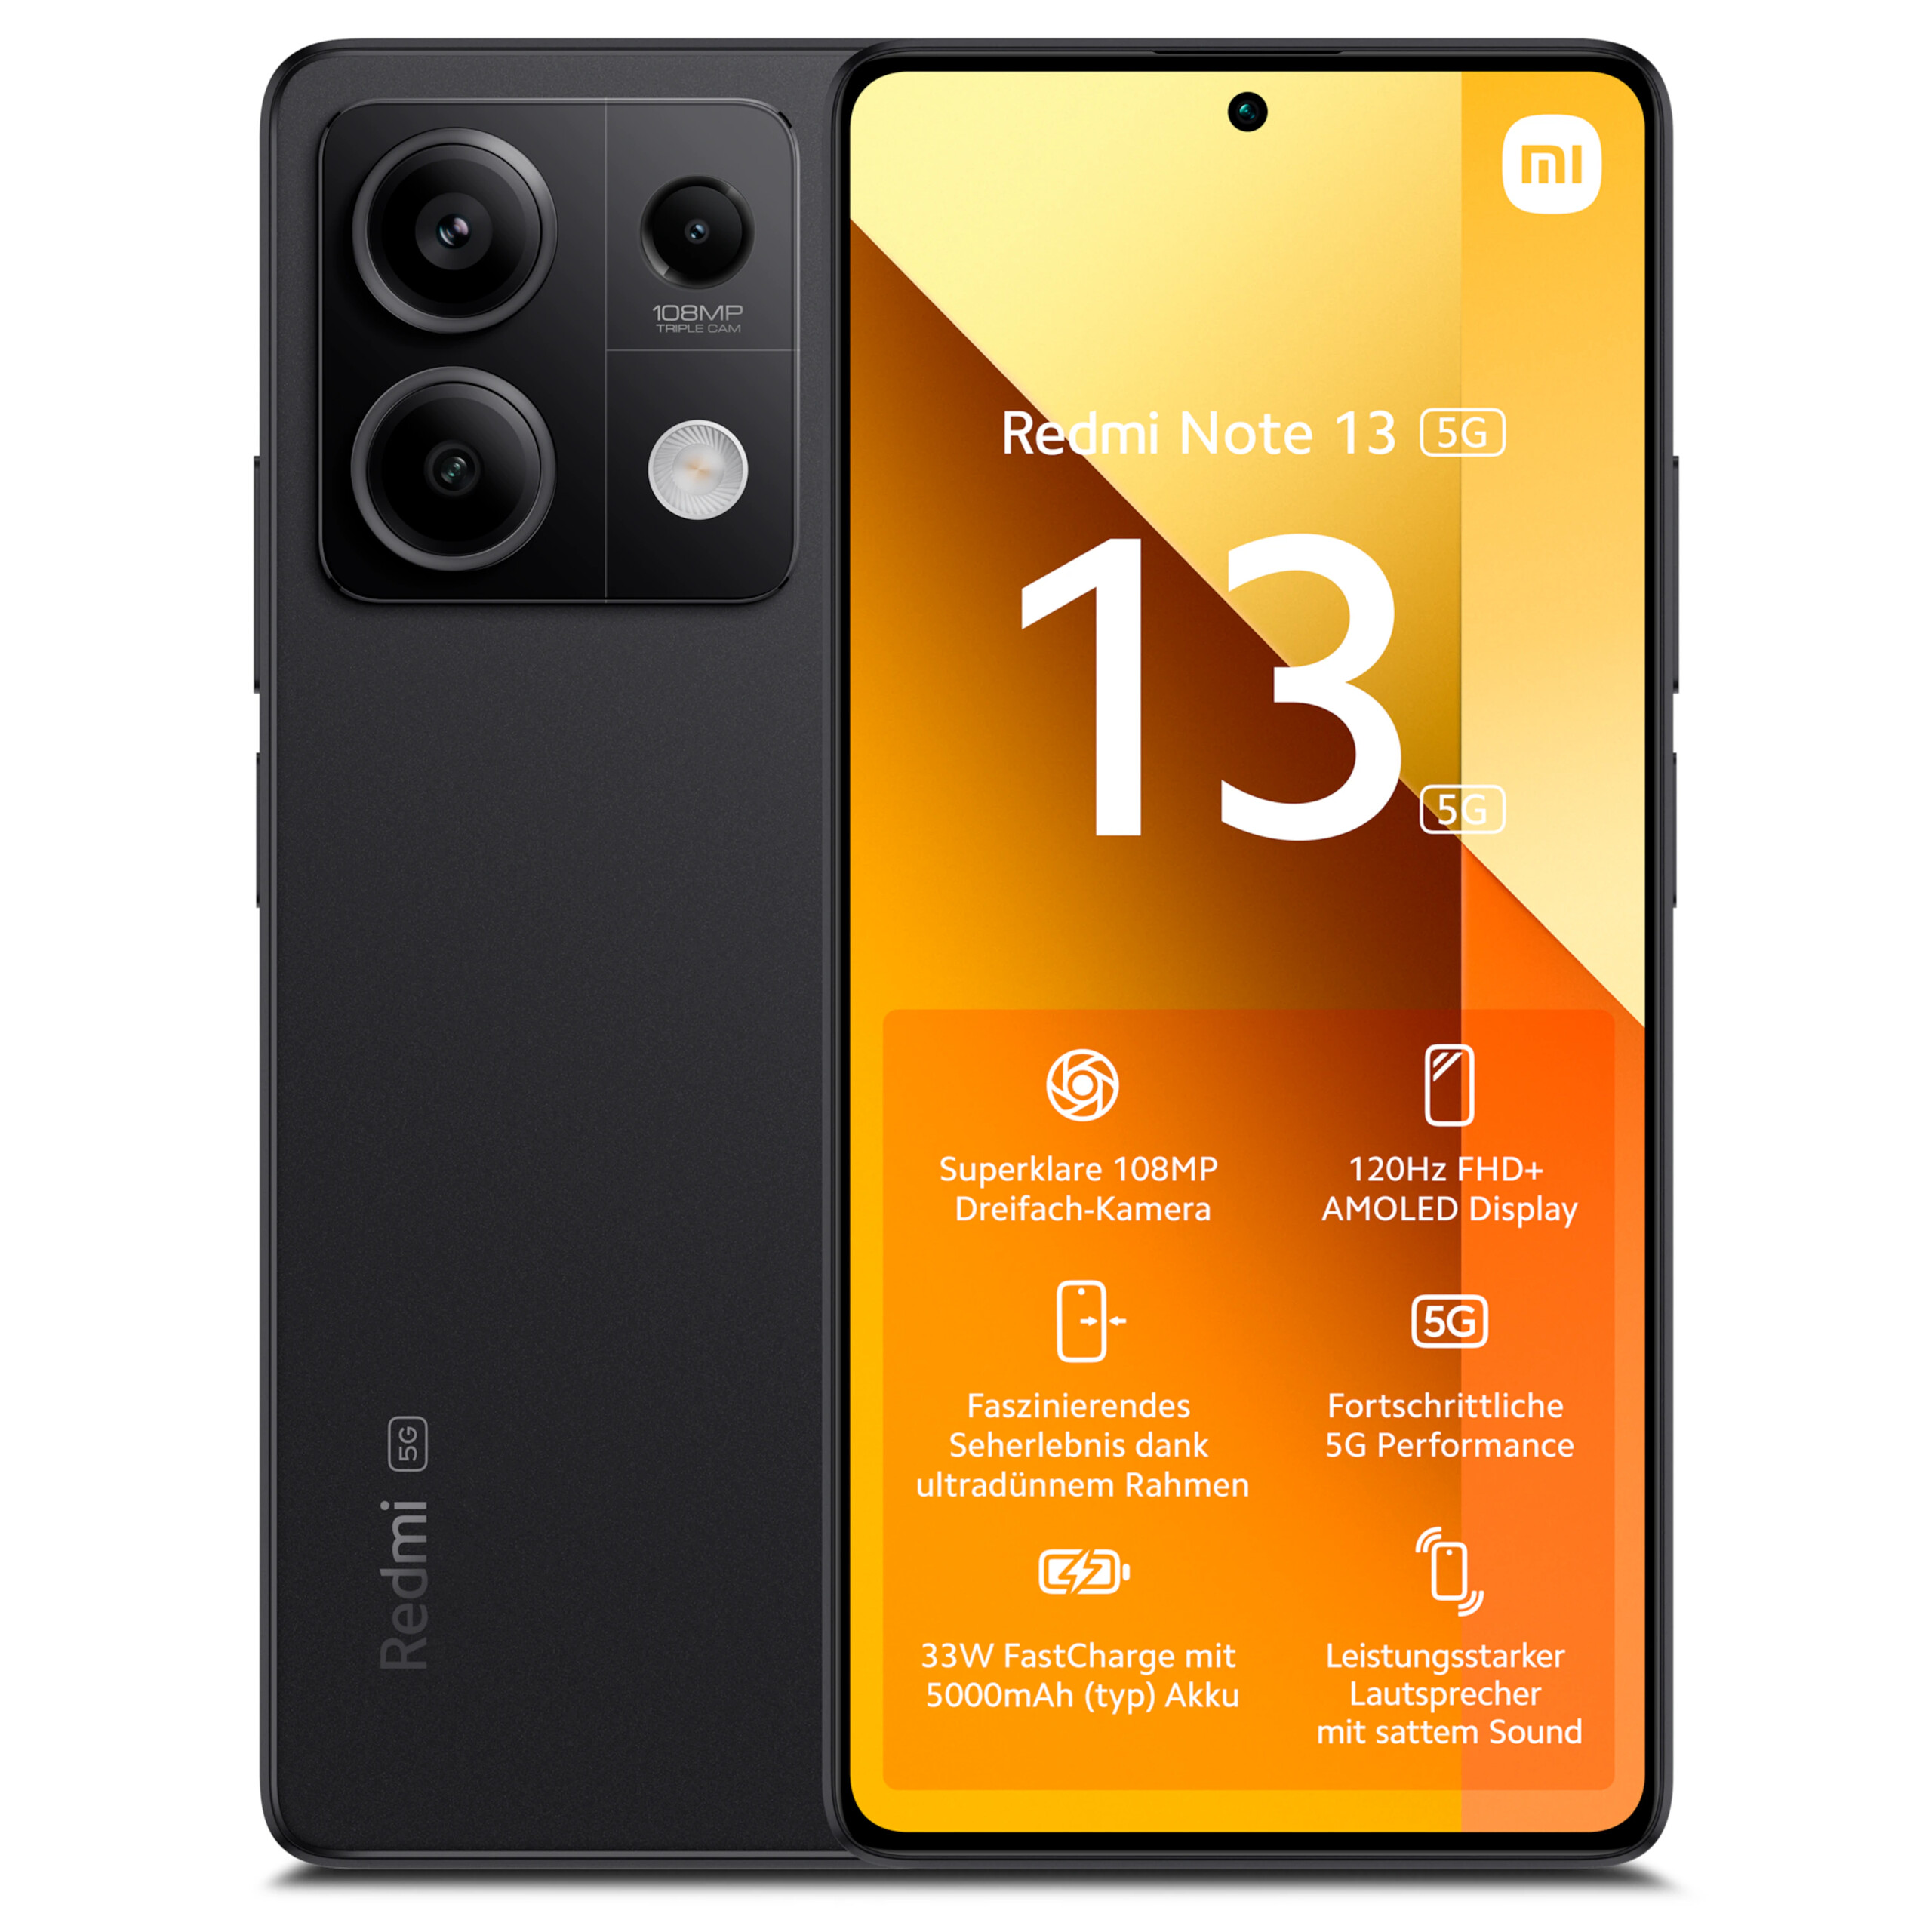 Redmi Note 13 5G series to launch in India today. Expected price